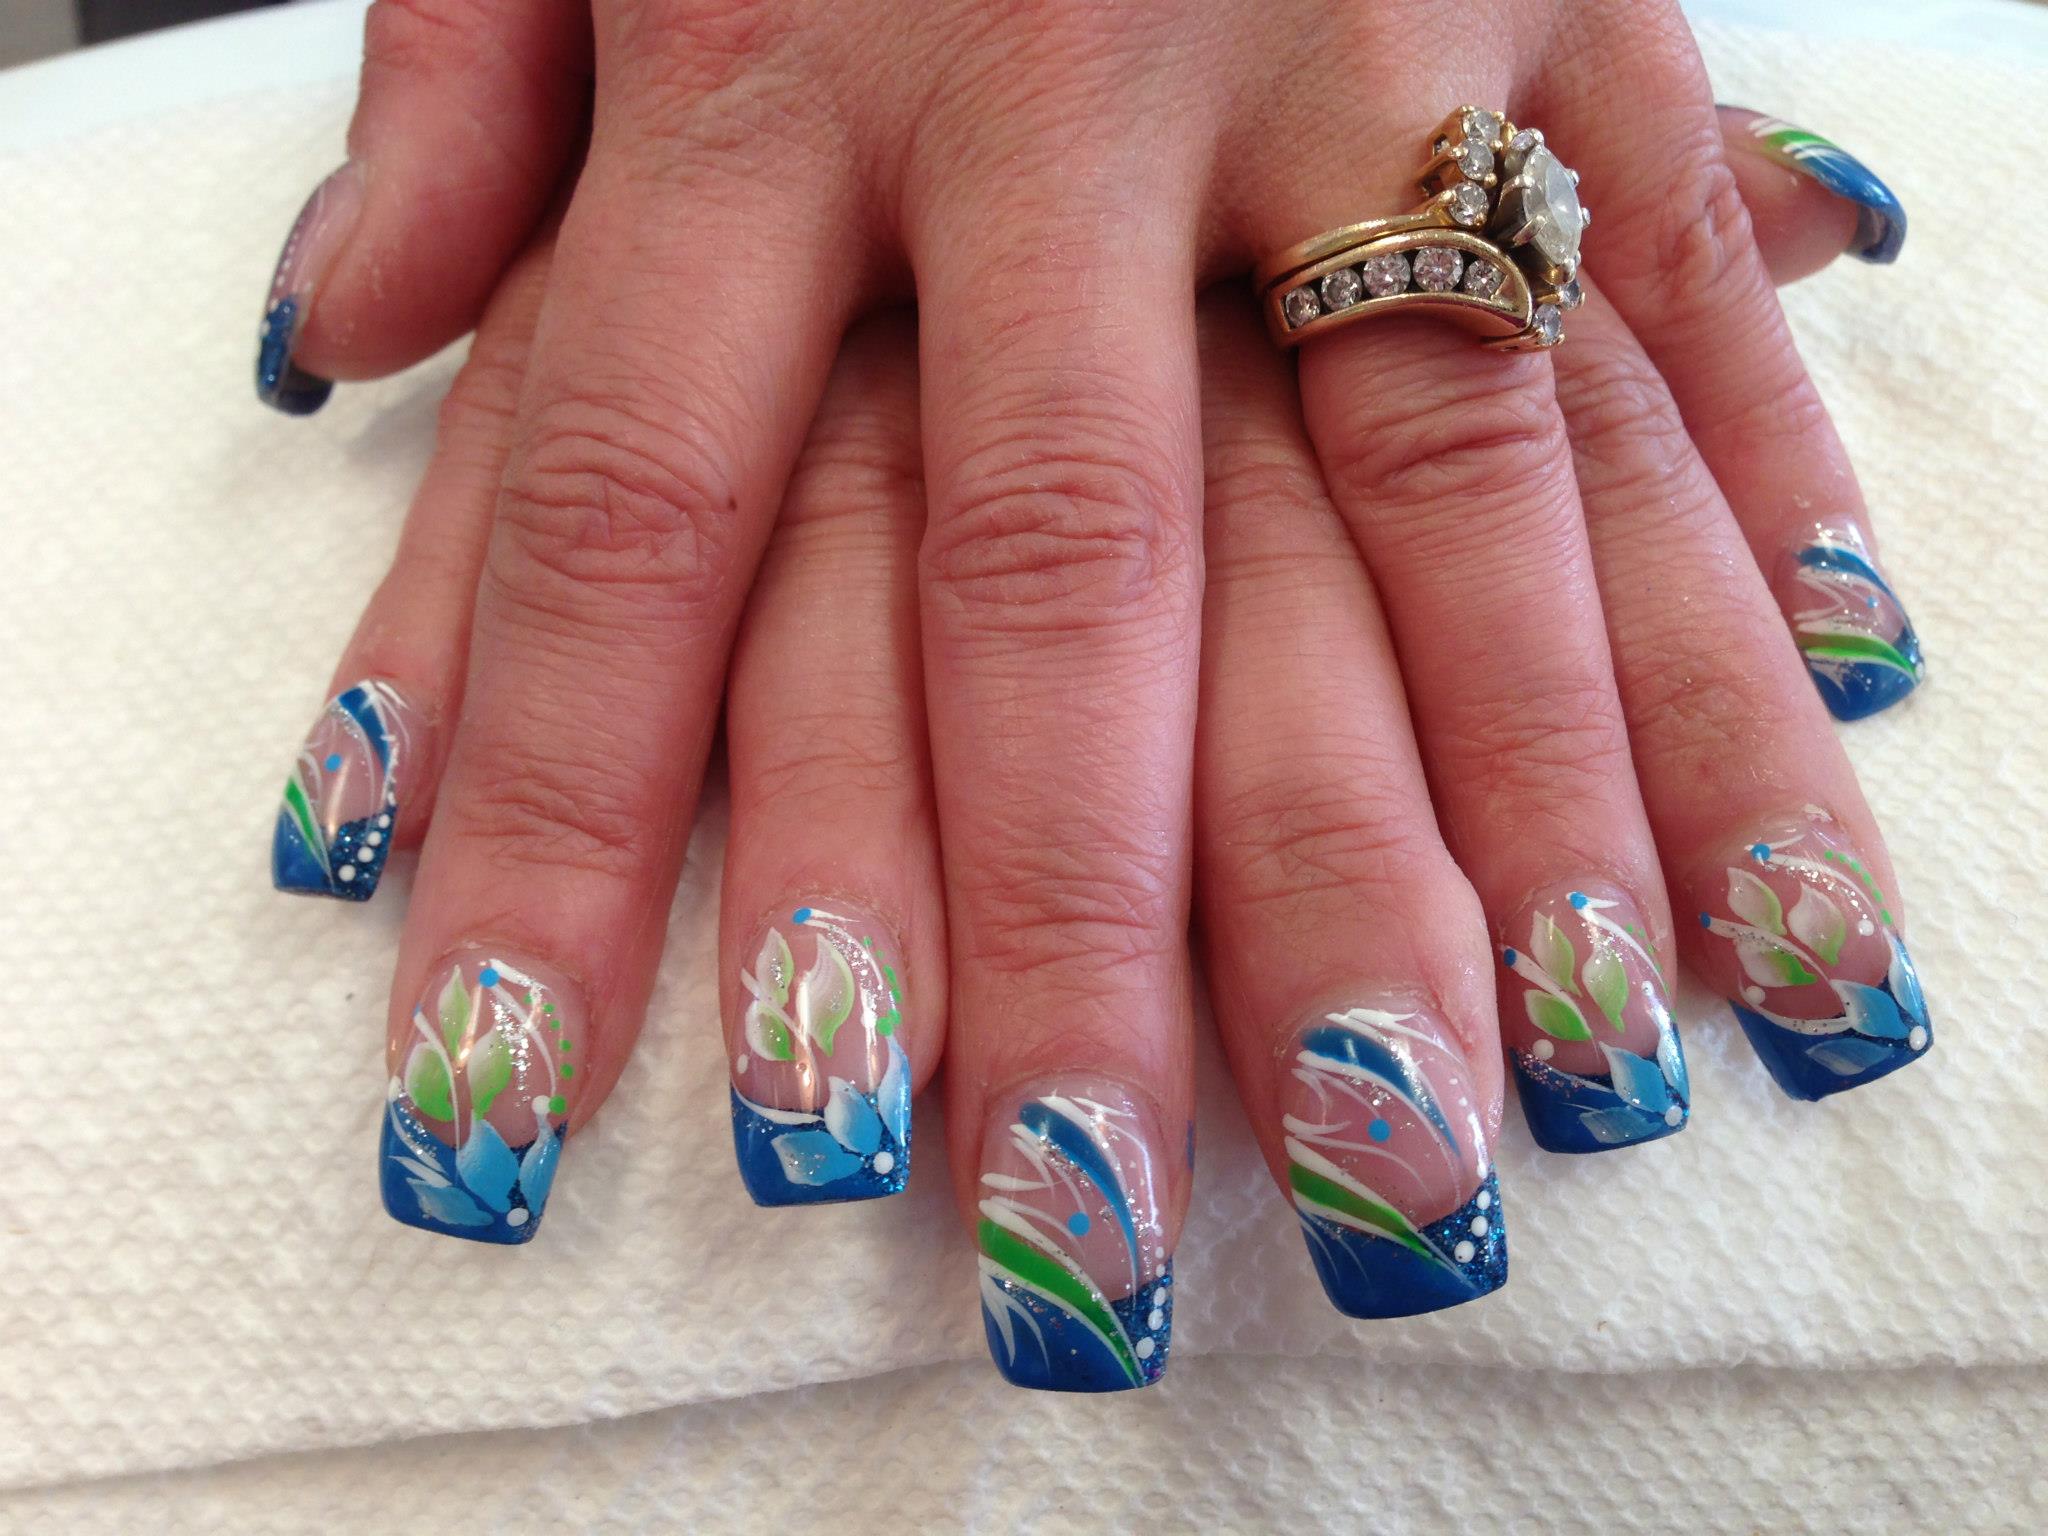 Blue and White Striped Nail Art Design - wide 1